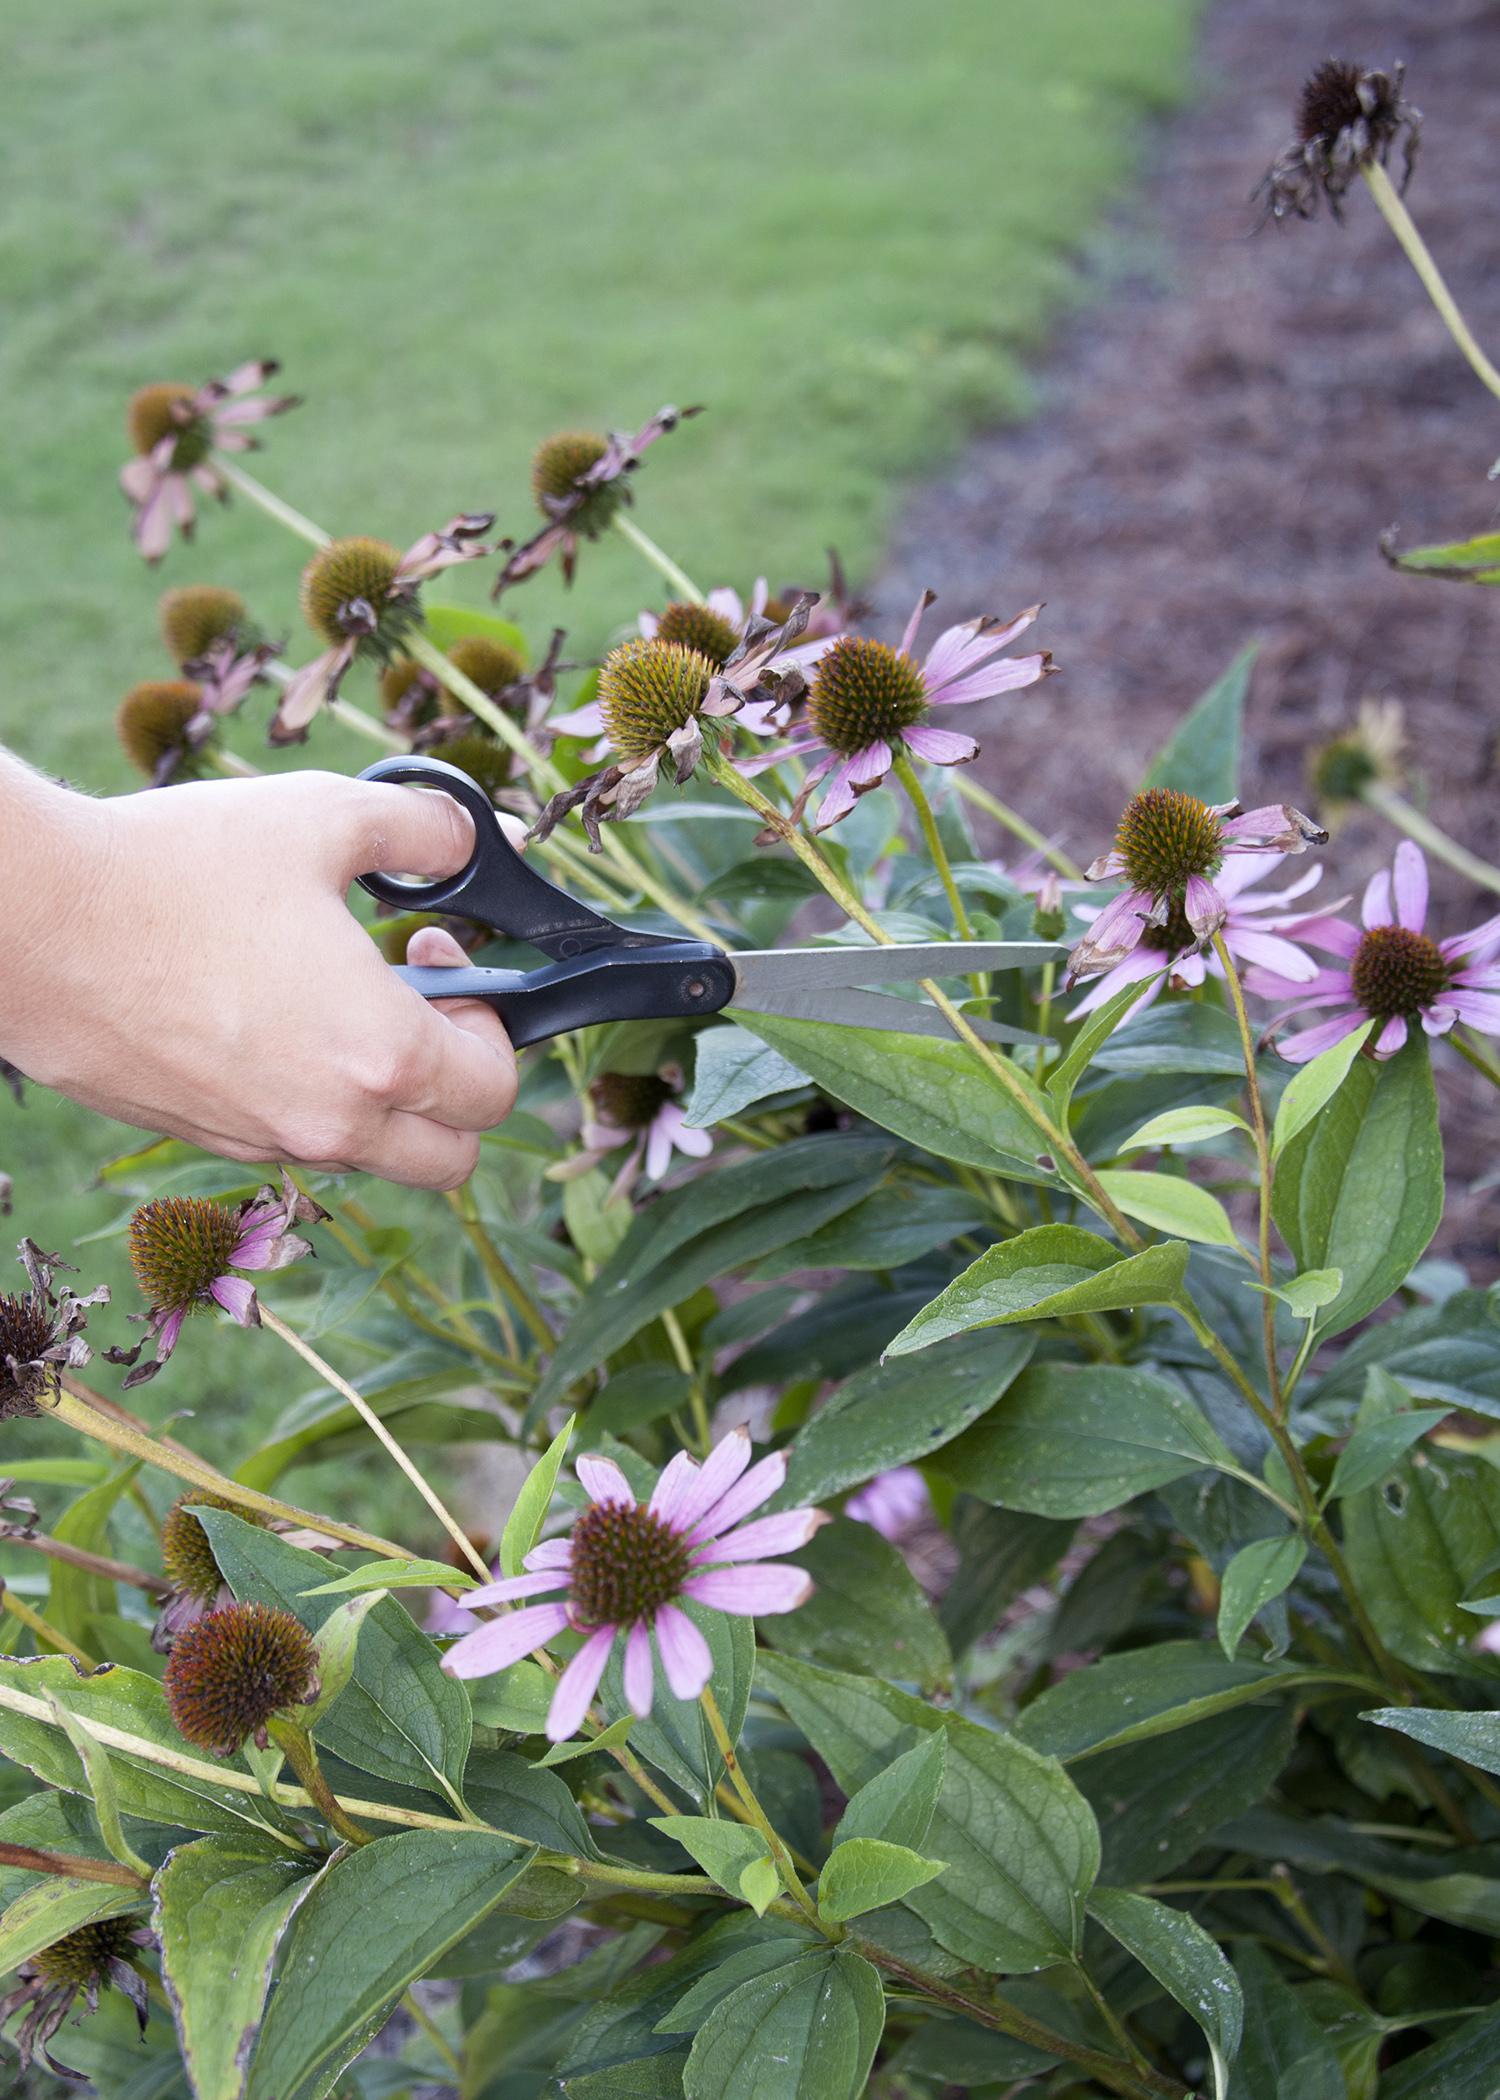 Removing spent flowers has big benefits for plants. For plants having single flowers, such as this Echinacea, simply deadhead spent flower stalks with a pair of scissors. (Photo by MSU Ag Communications/Kat Lawrence)